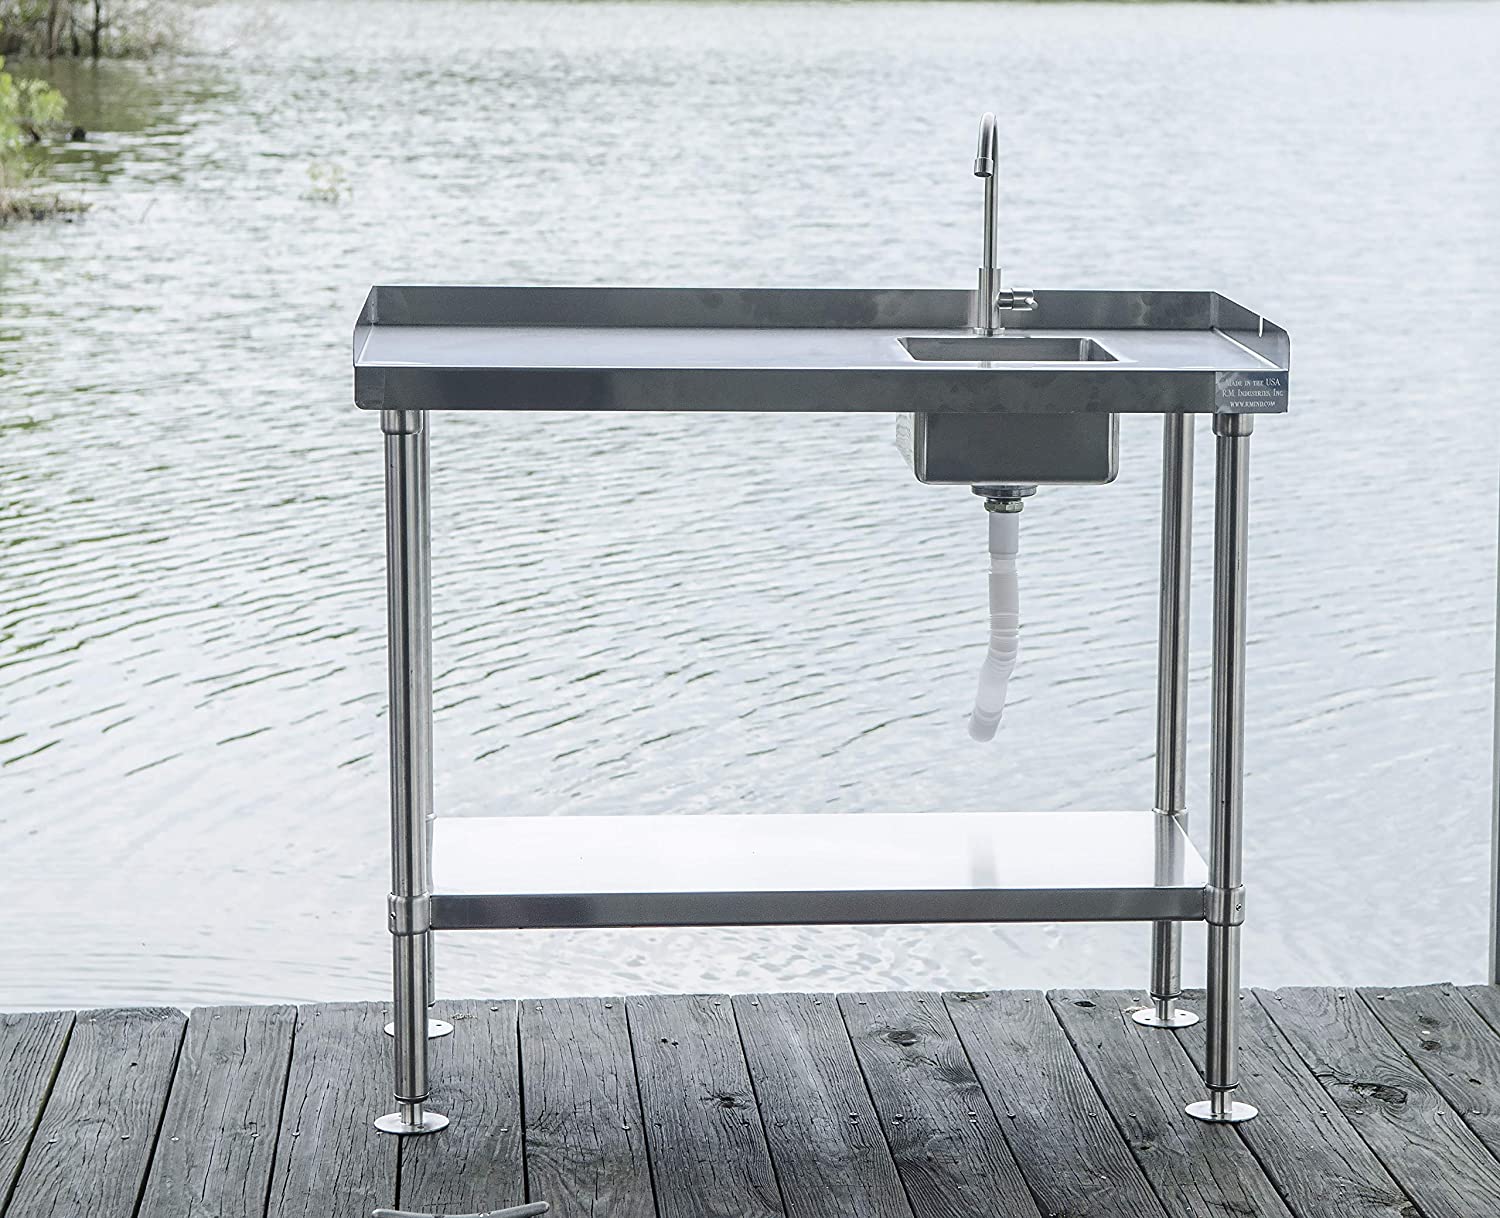 RITE-HITE stainless steel fish cleaning table mounted to dock